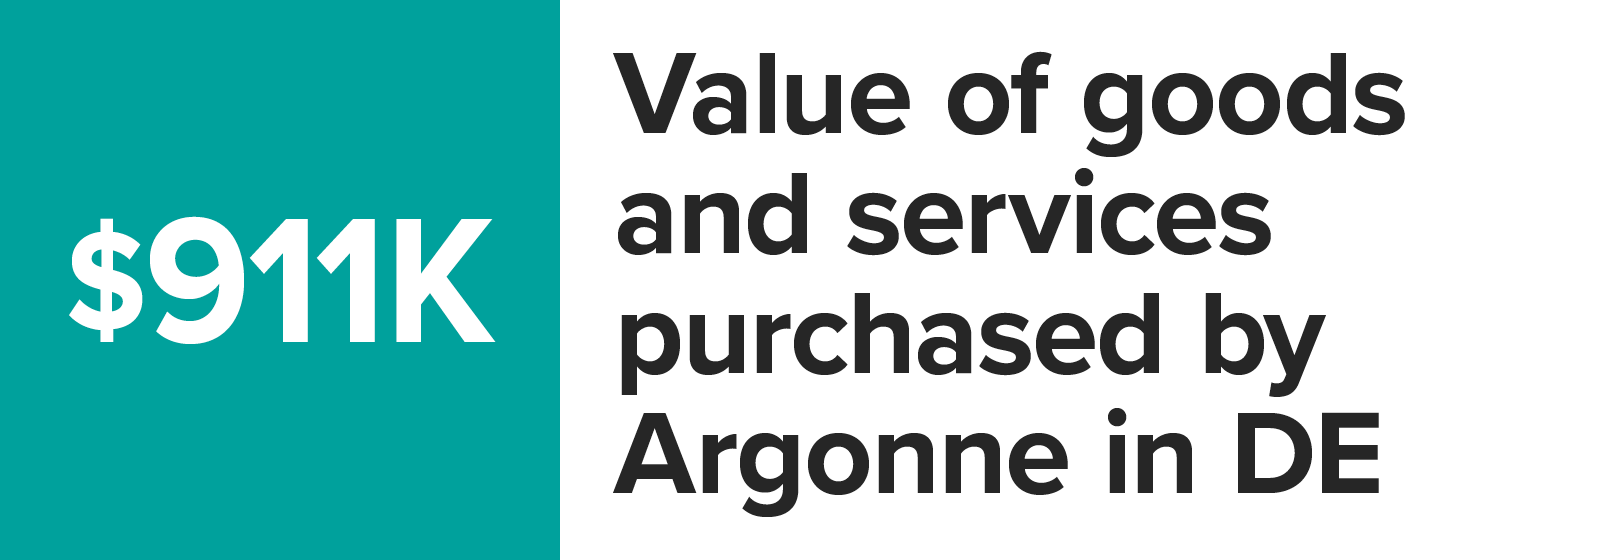 Number graphic value of goods and services purchased by Argonne in Delaware